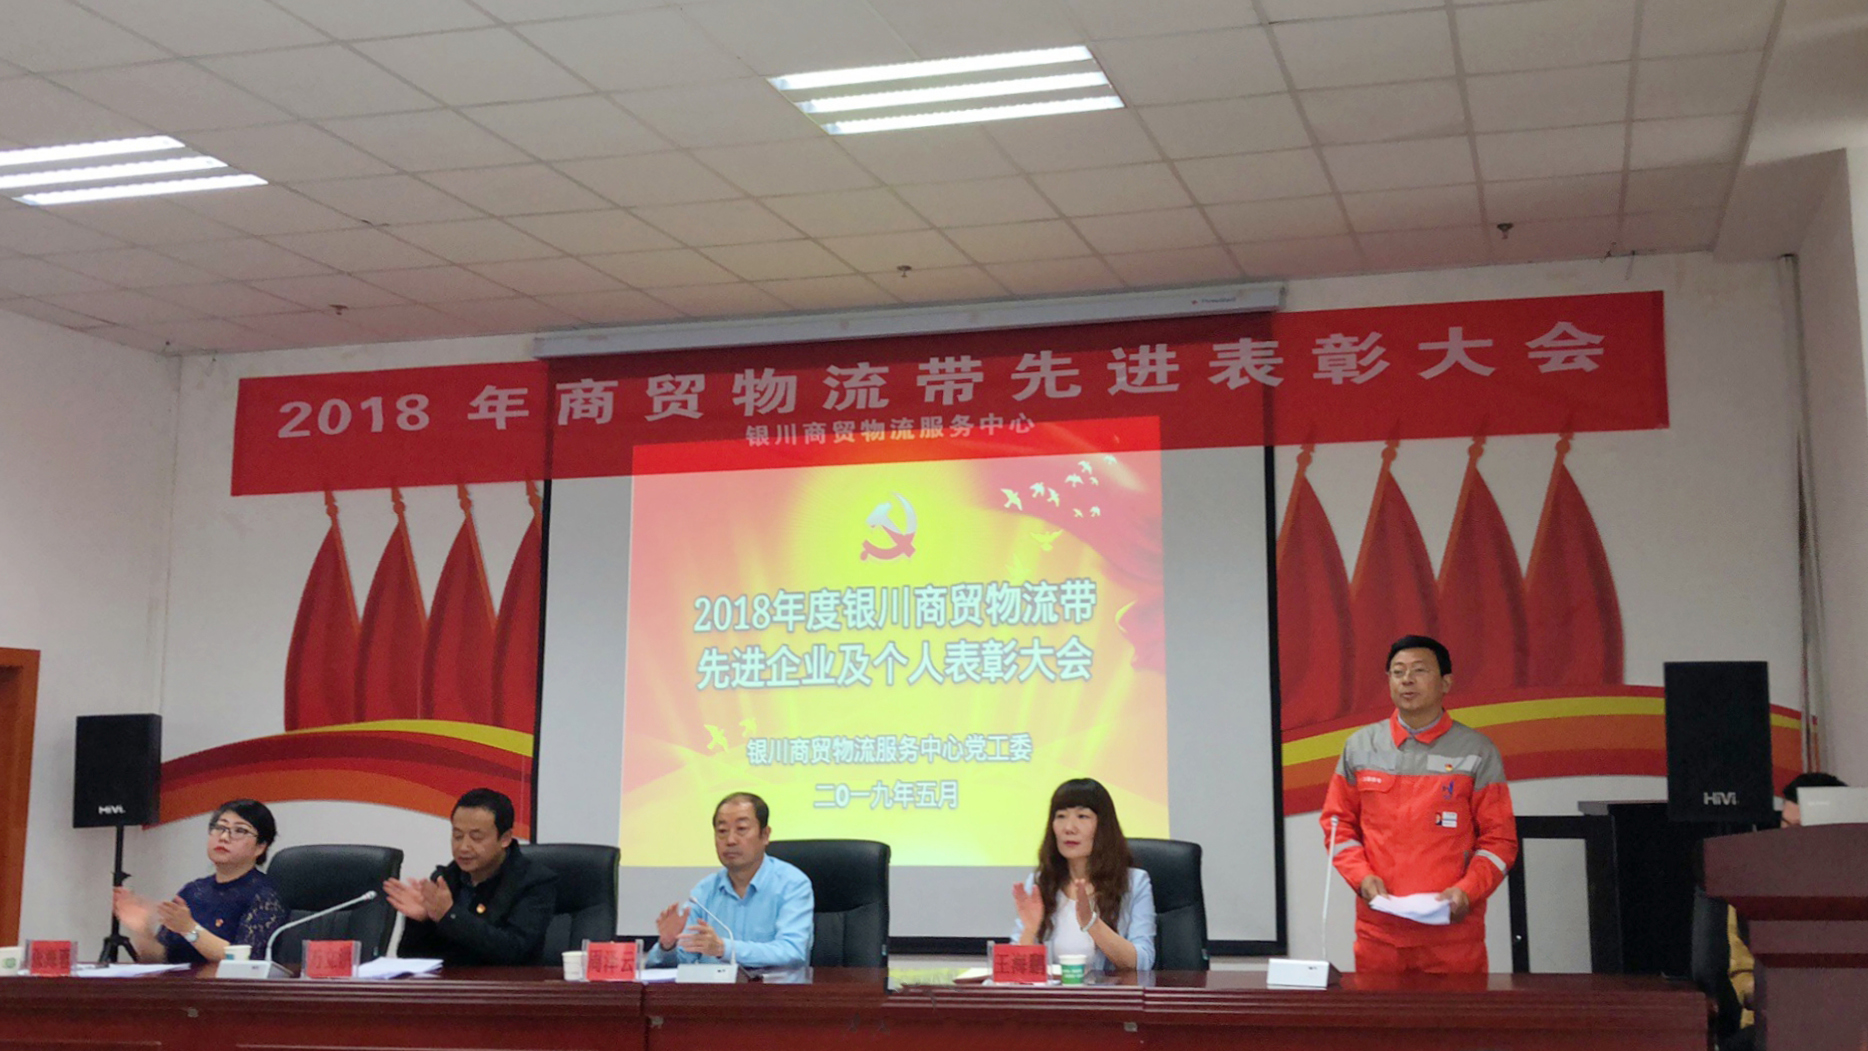 Light of Laborers in May (4) — East Thermal Power Participated in the 2018 Commemoration Conference for Advanced labor Union